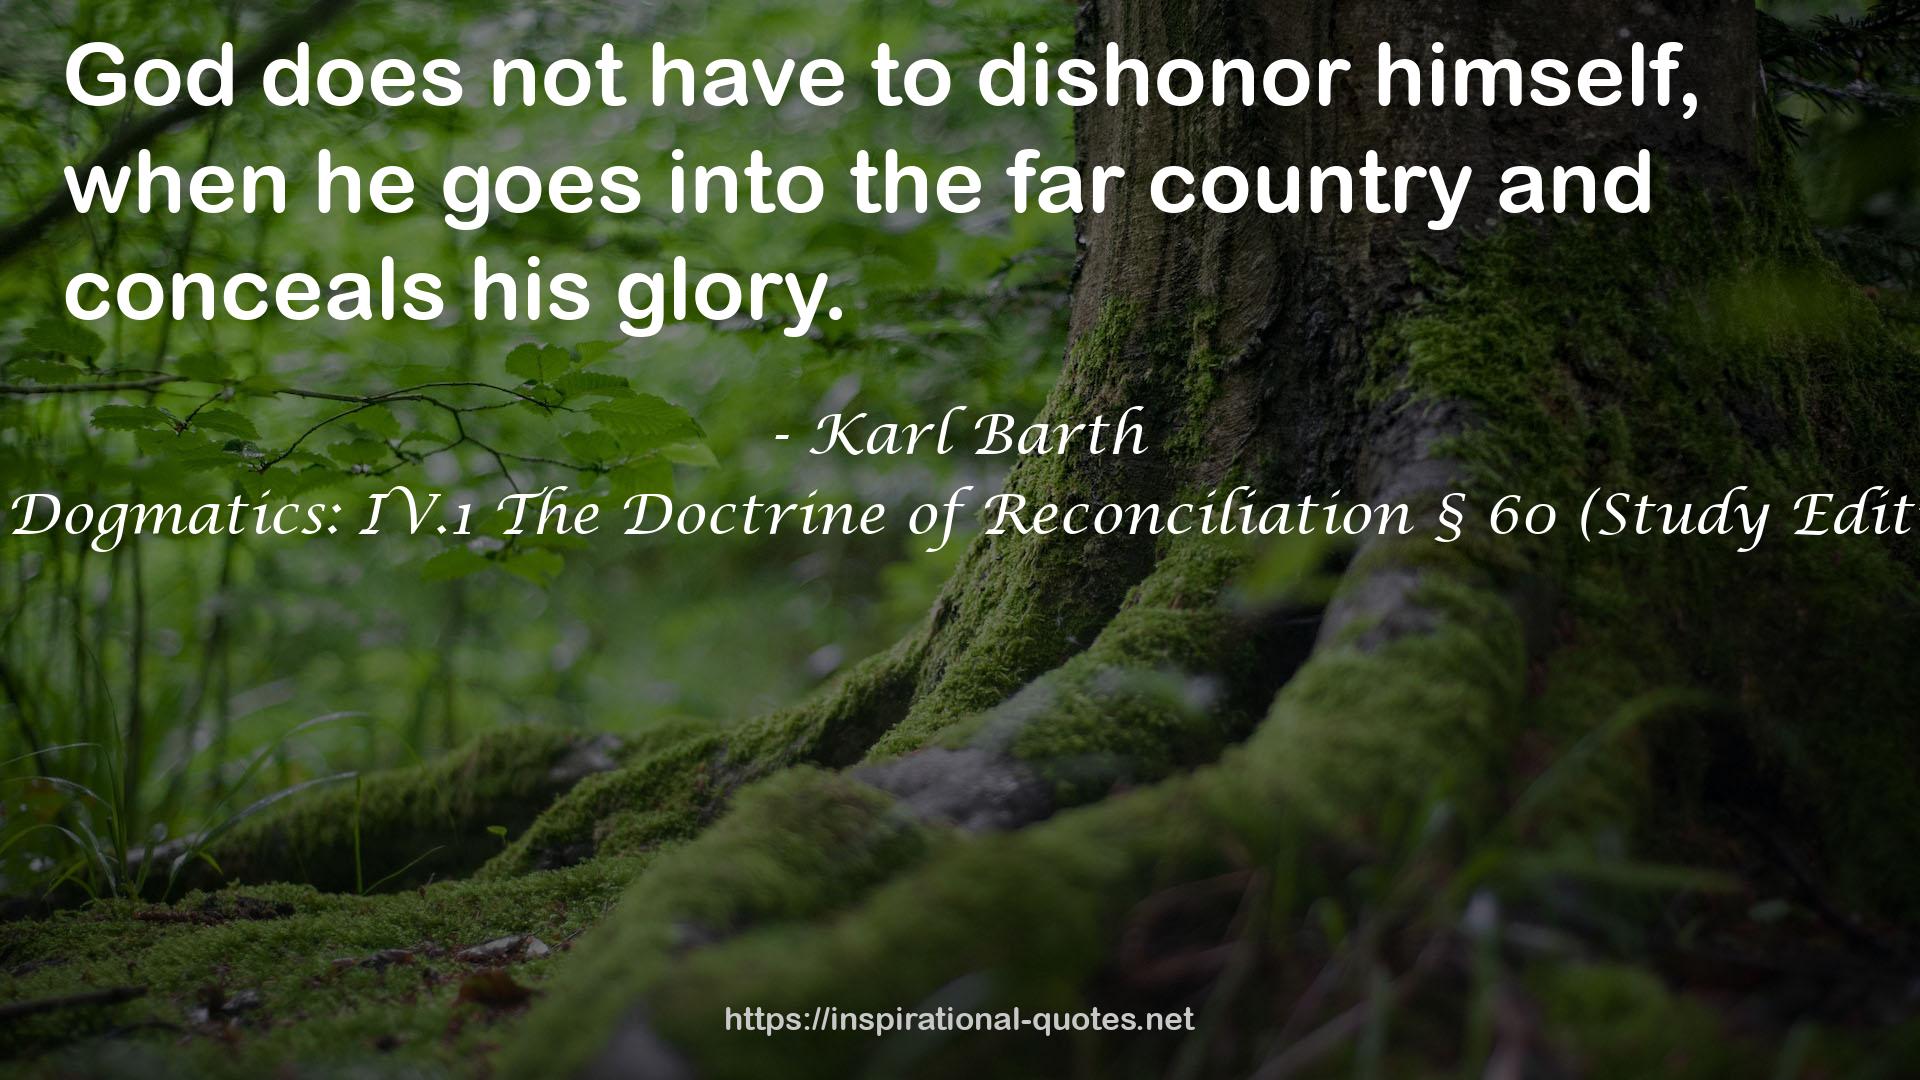 Church Dogmatics: IV.1 The Doctrine of Reconciliation § 60 (Study Edition #22) QUOTES